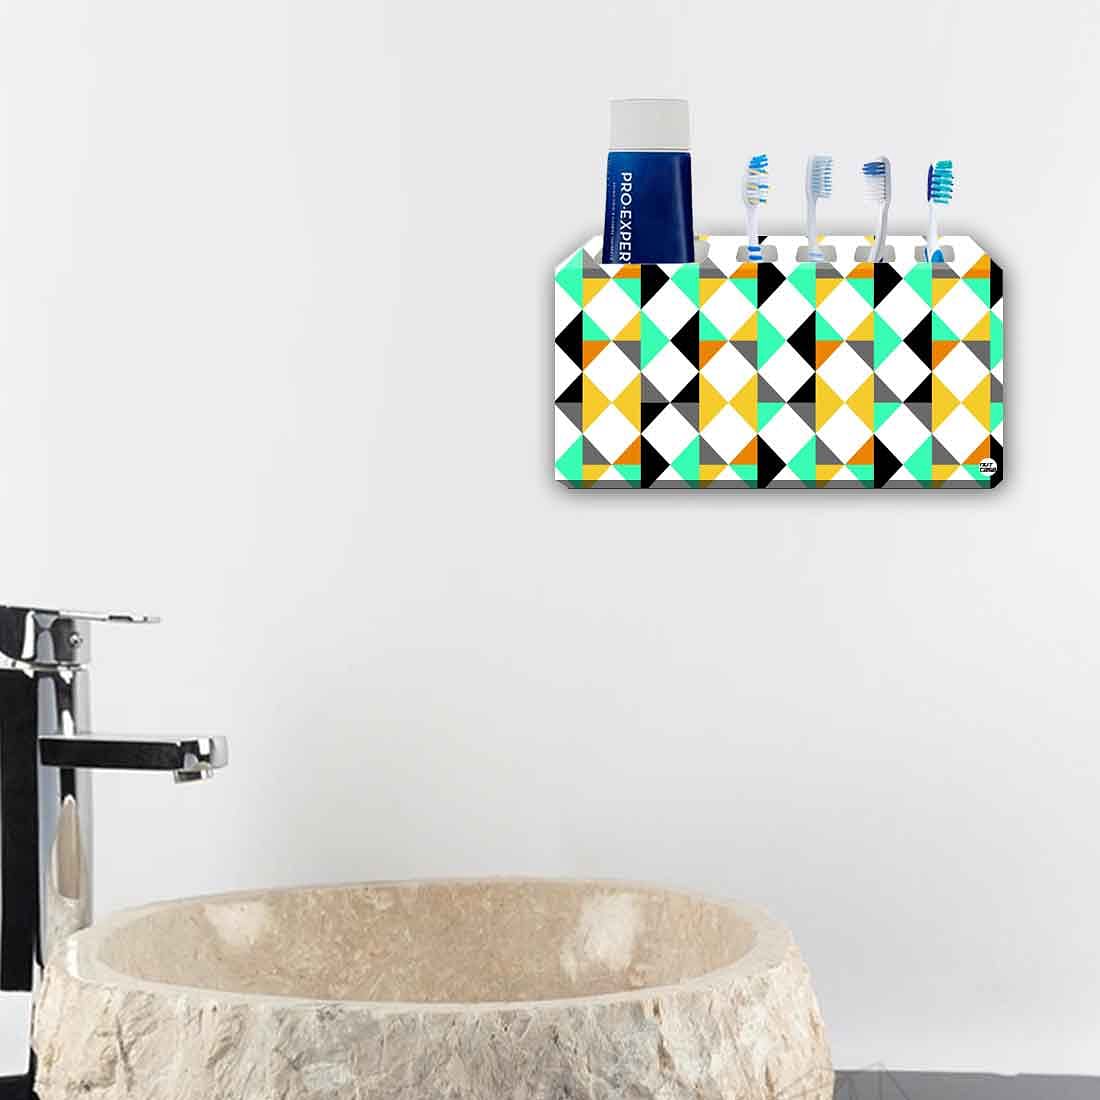 Toothbrush Holder Wall Mounted -Abstract Nutcase